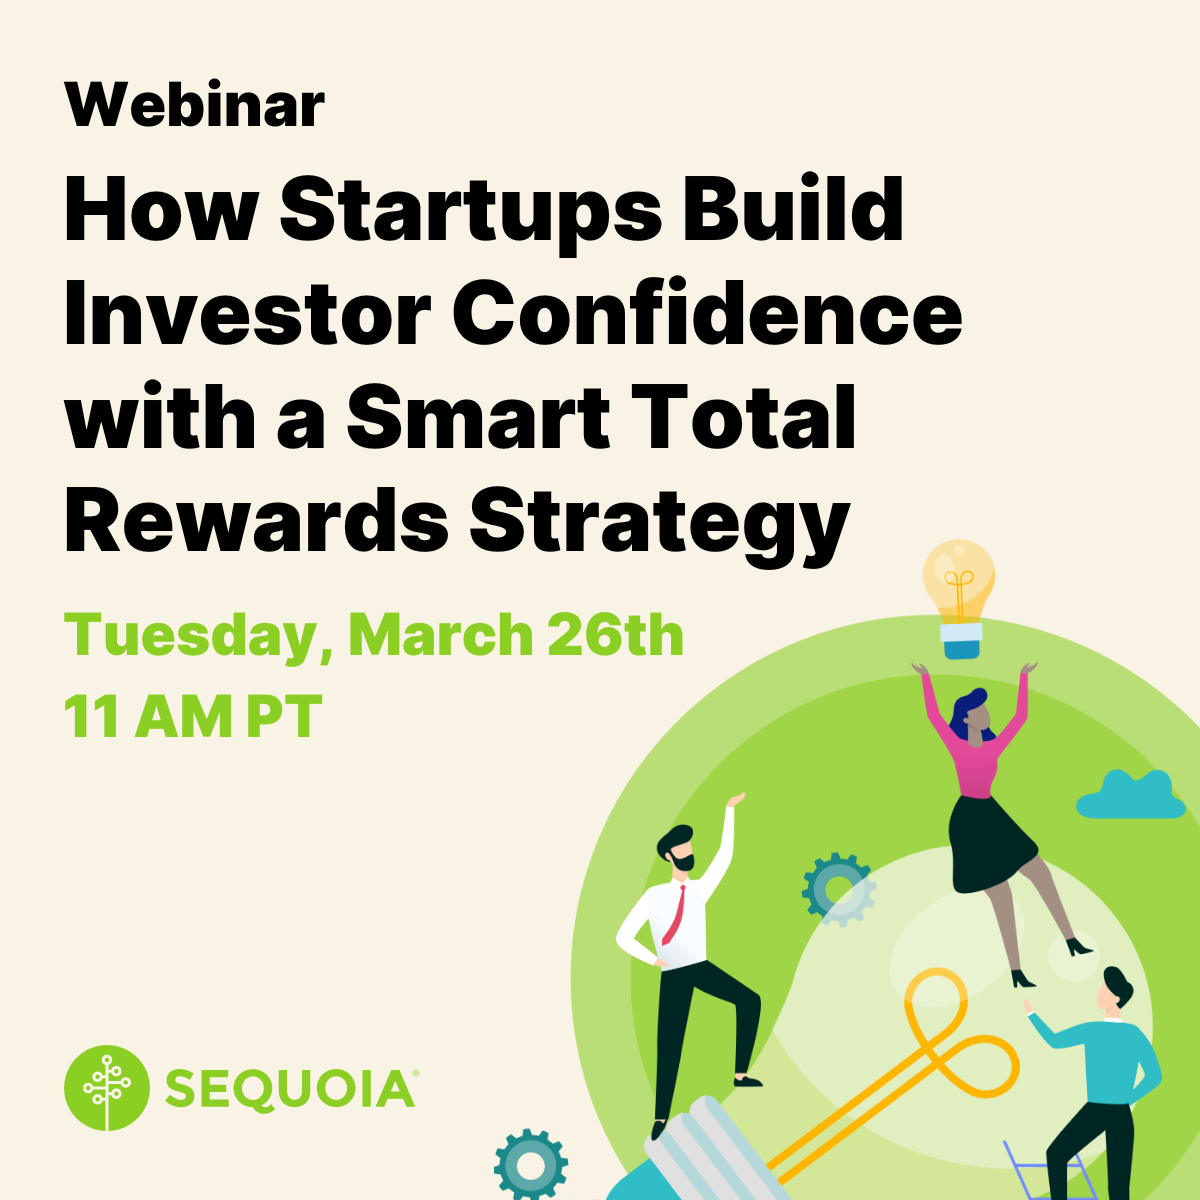 How Startups Build Investor Confidence with a Smart Total Rewards Strategy